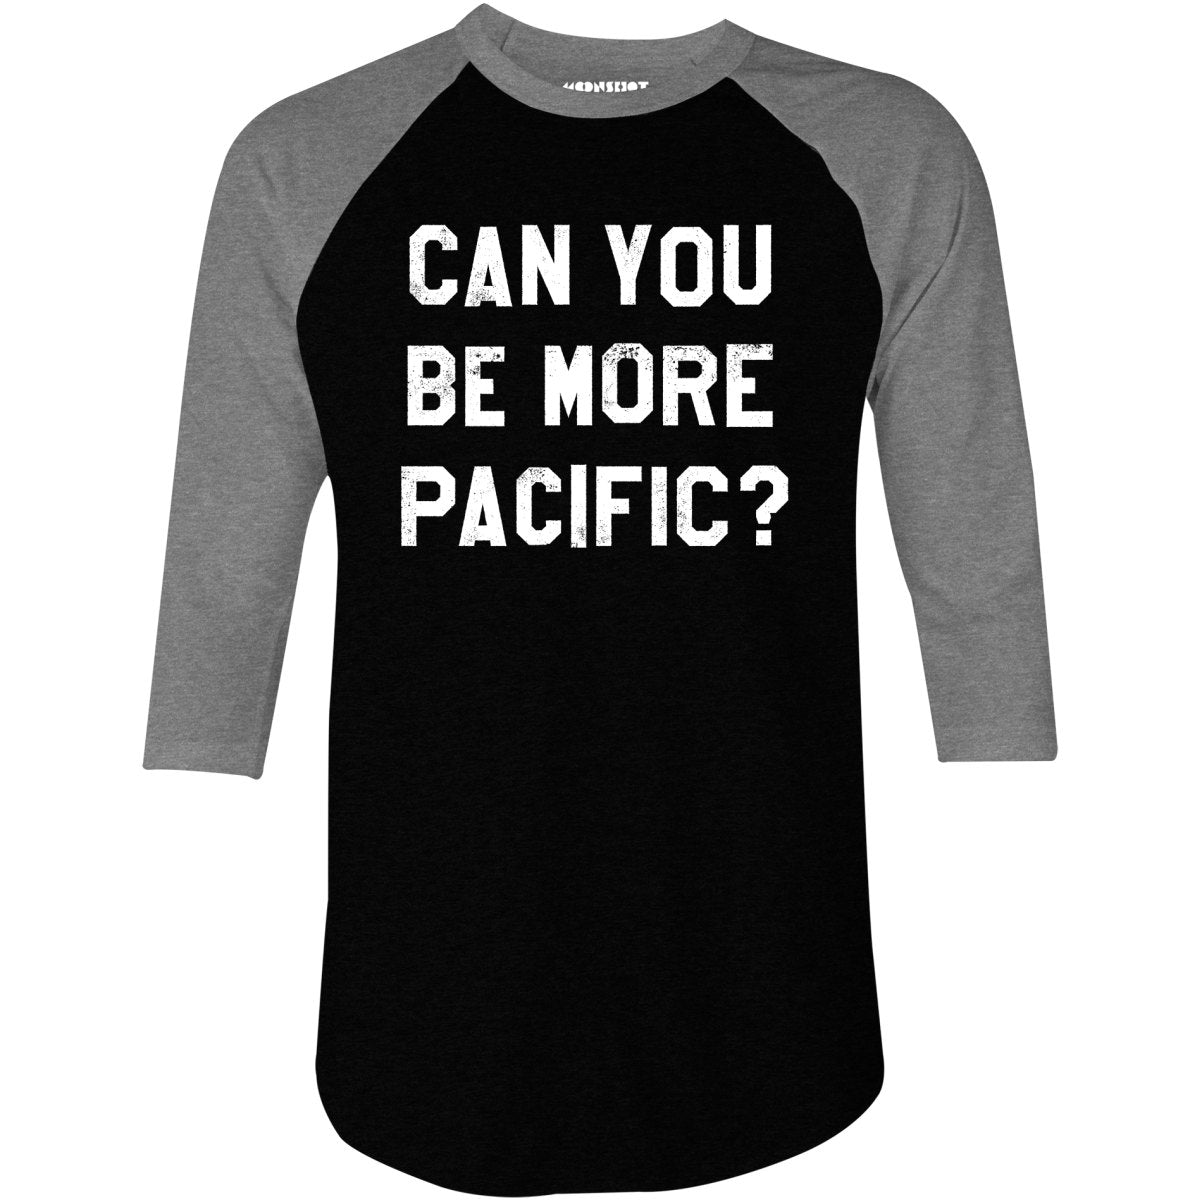 Can You Be More Pacific? - 3/4 Sleeve Raglan T-Shirt